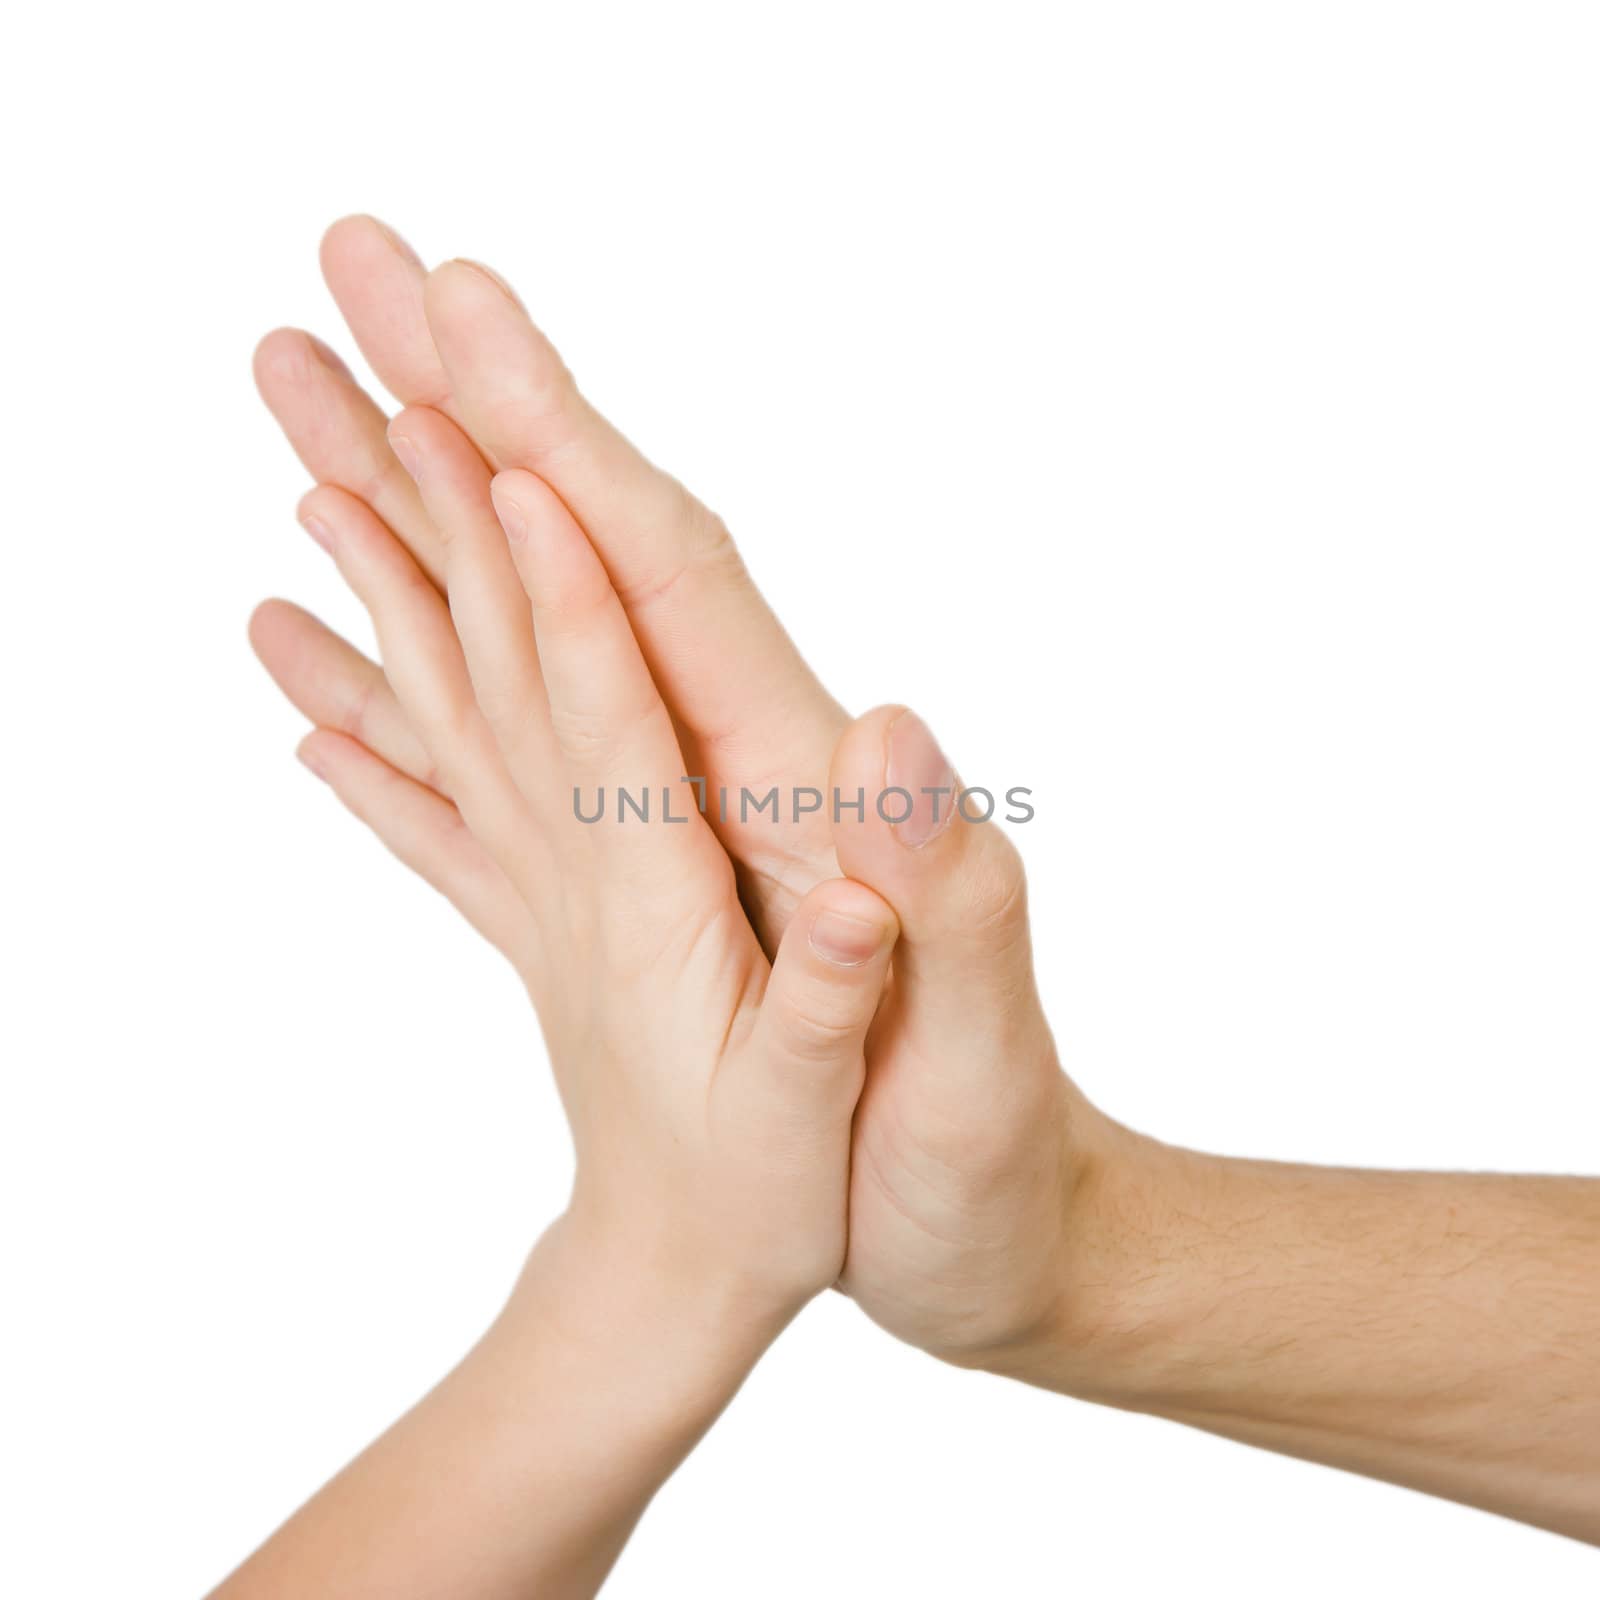 children's and men's hand touching on a white background
